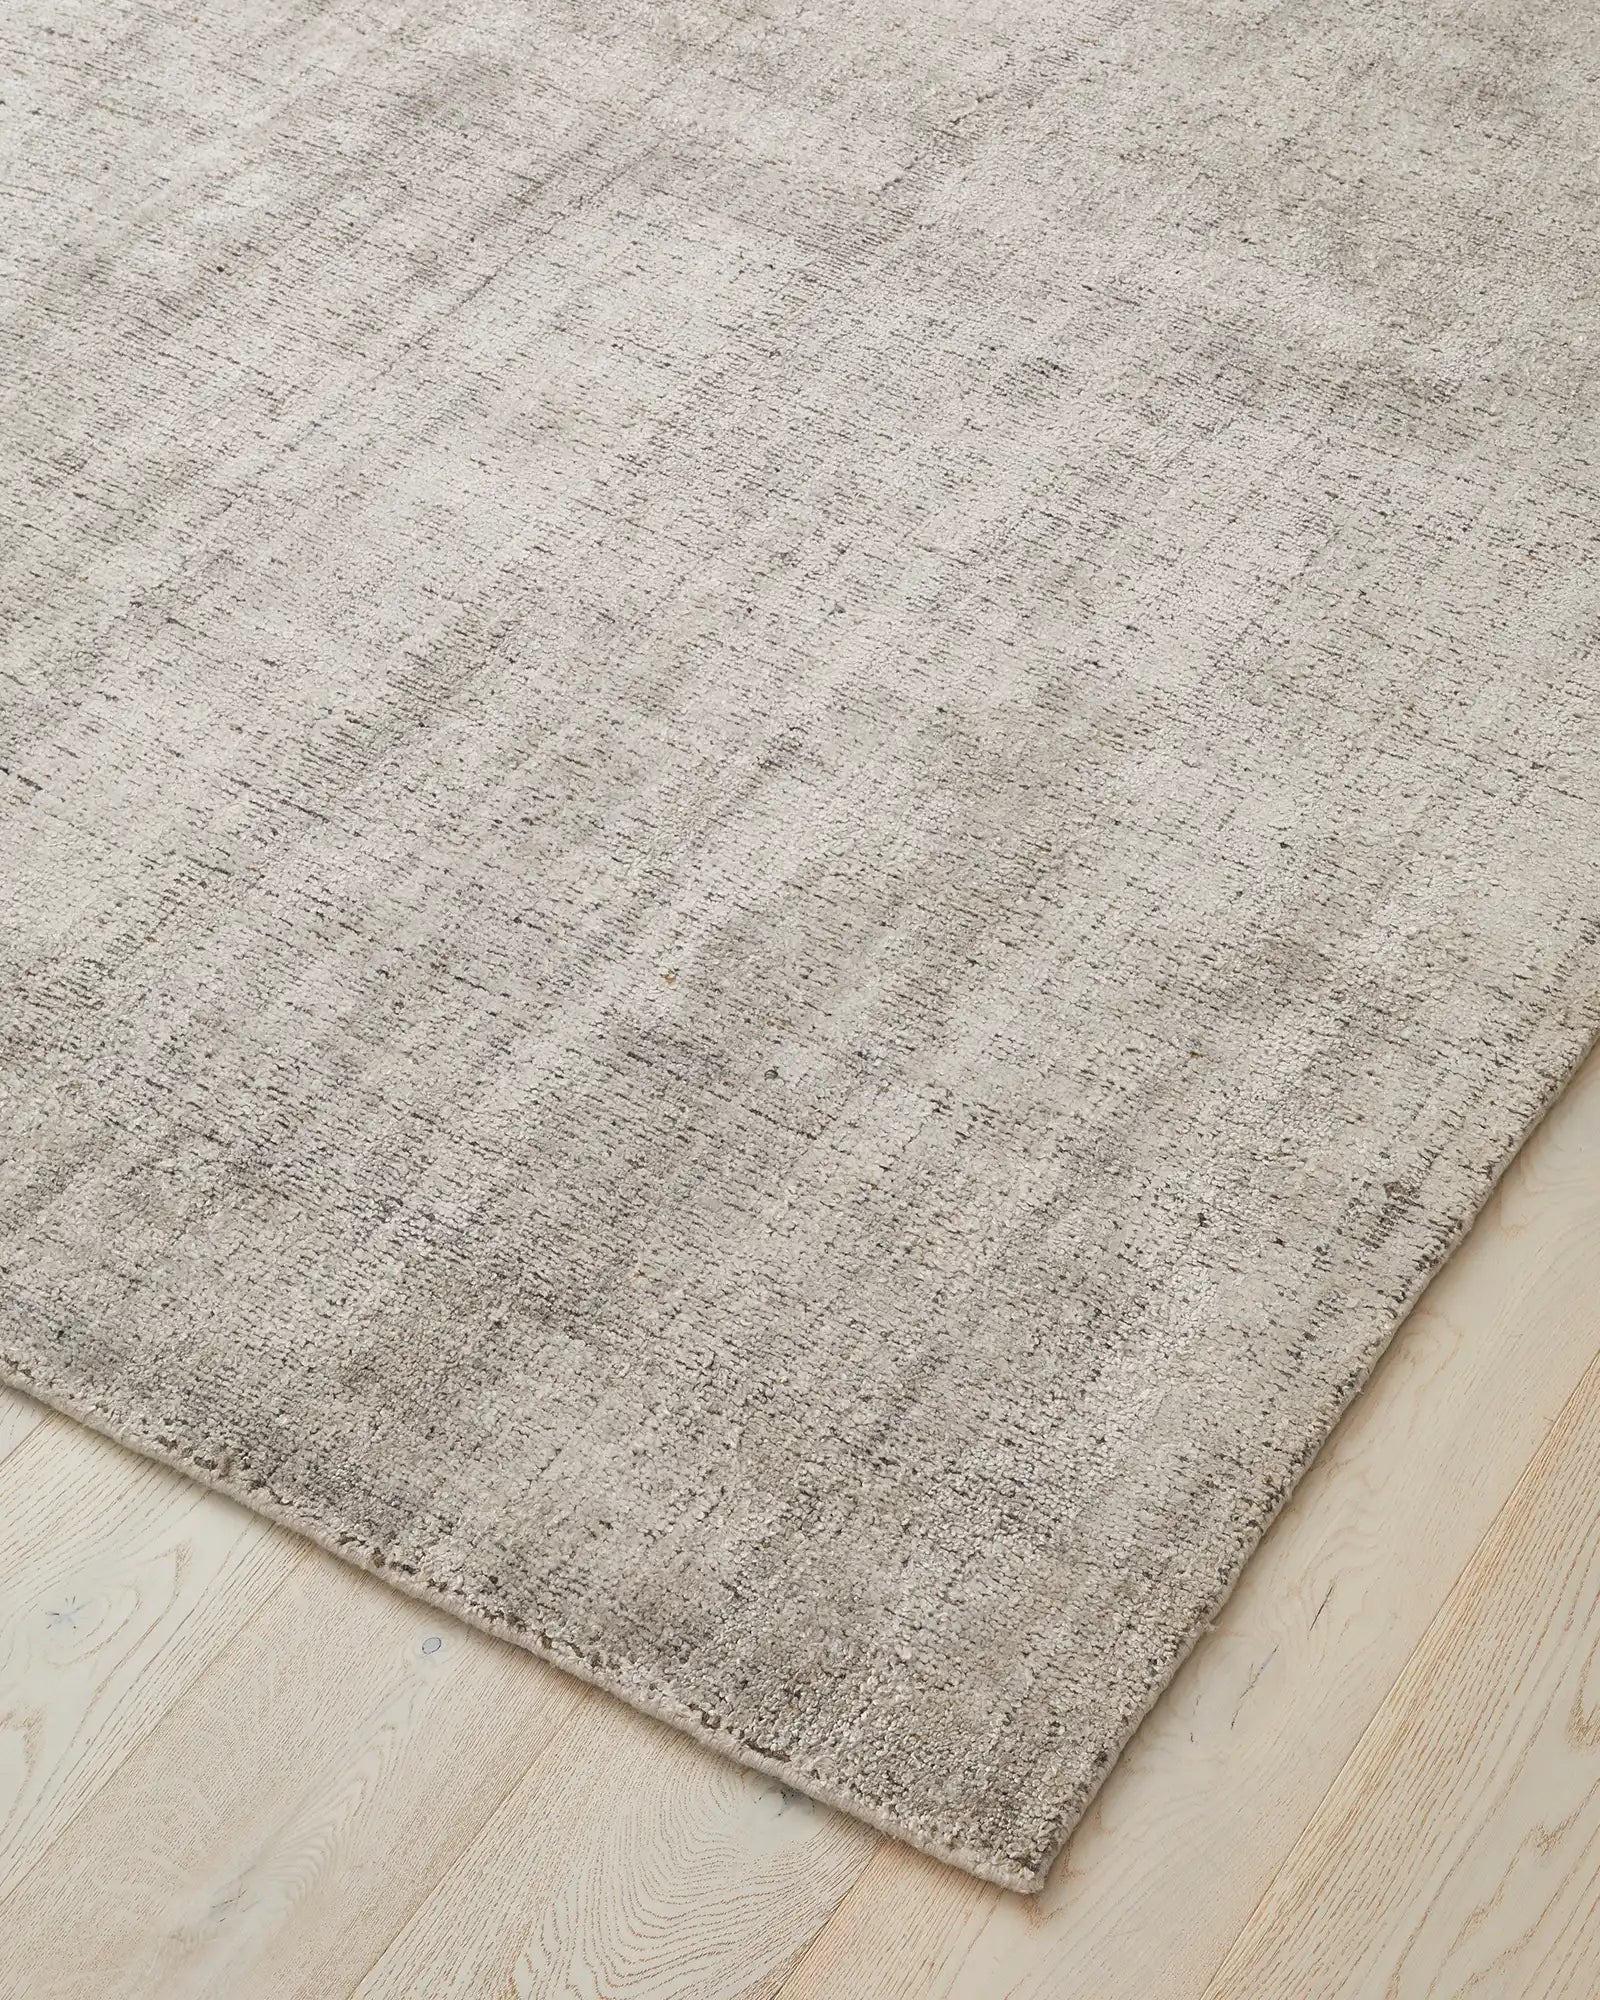 Close-up image highlighting the texture and weave of the rug, emphasising the blend of viscose and wool materials.